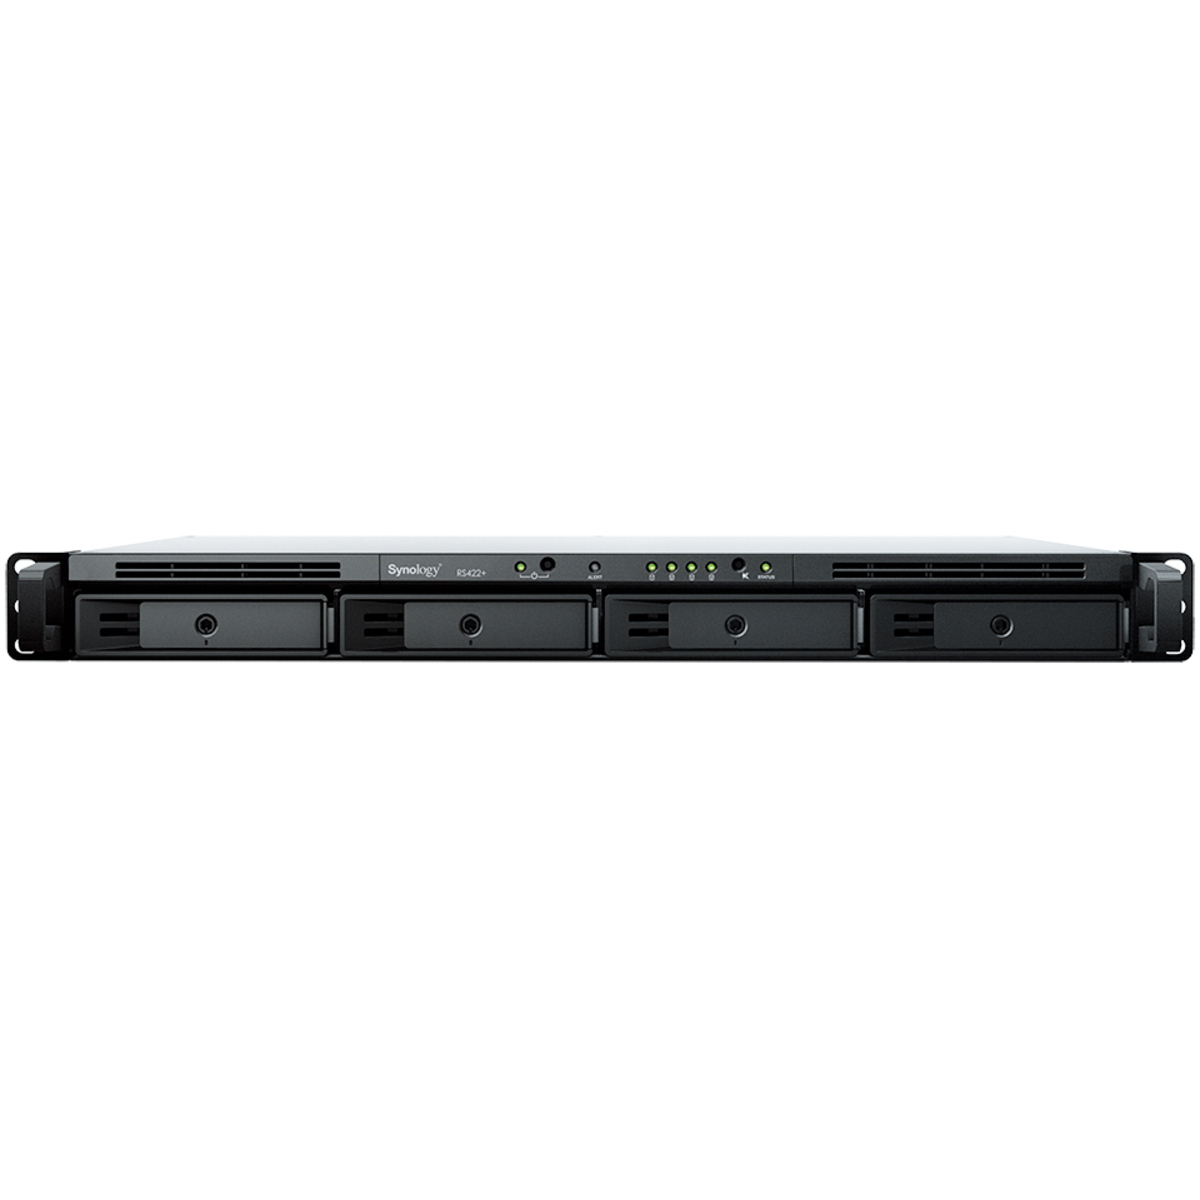 Synology RackStation RS422+ RackMount 4-Bay Personal / Basic Home / Small Office NAS - Network Attached Storage Device Burn-In Tested Configurations RackStation RS422+